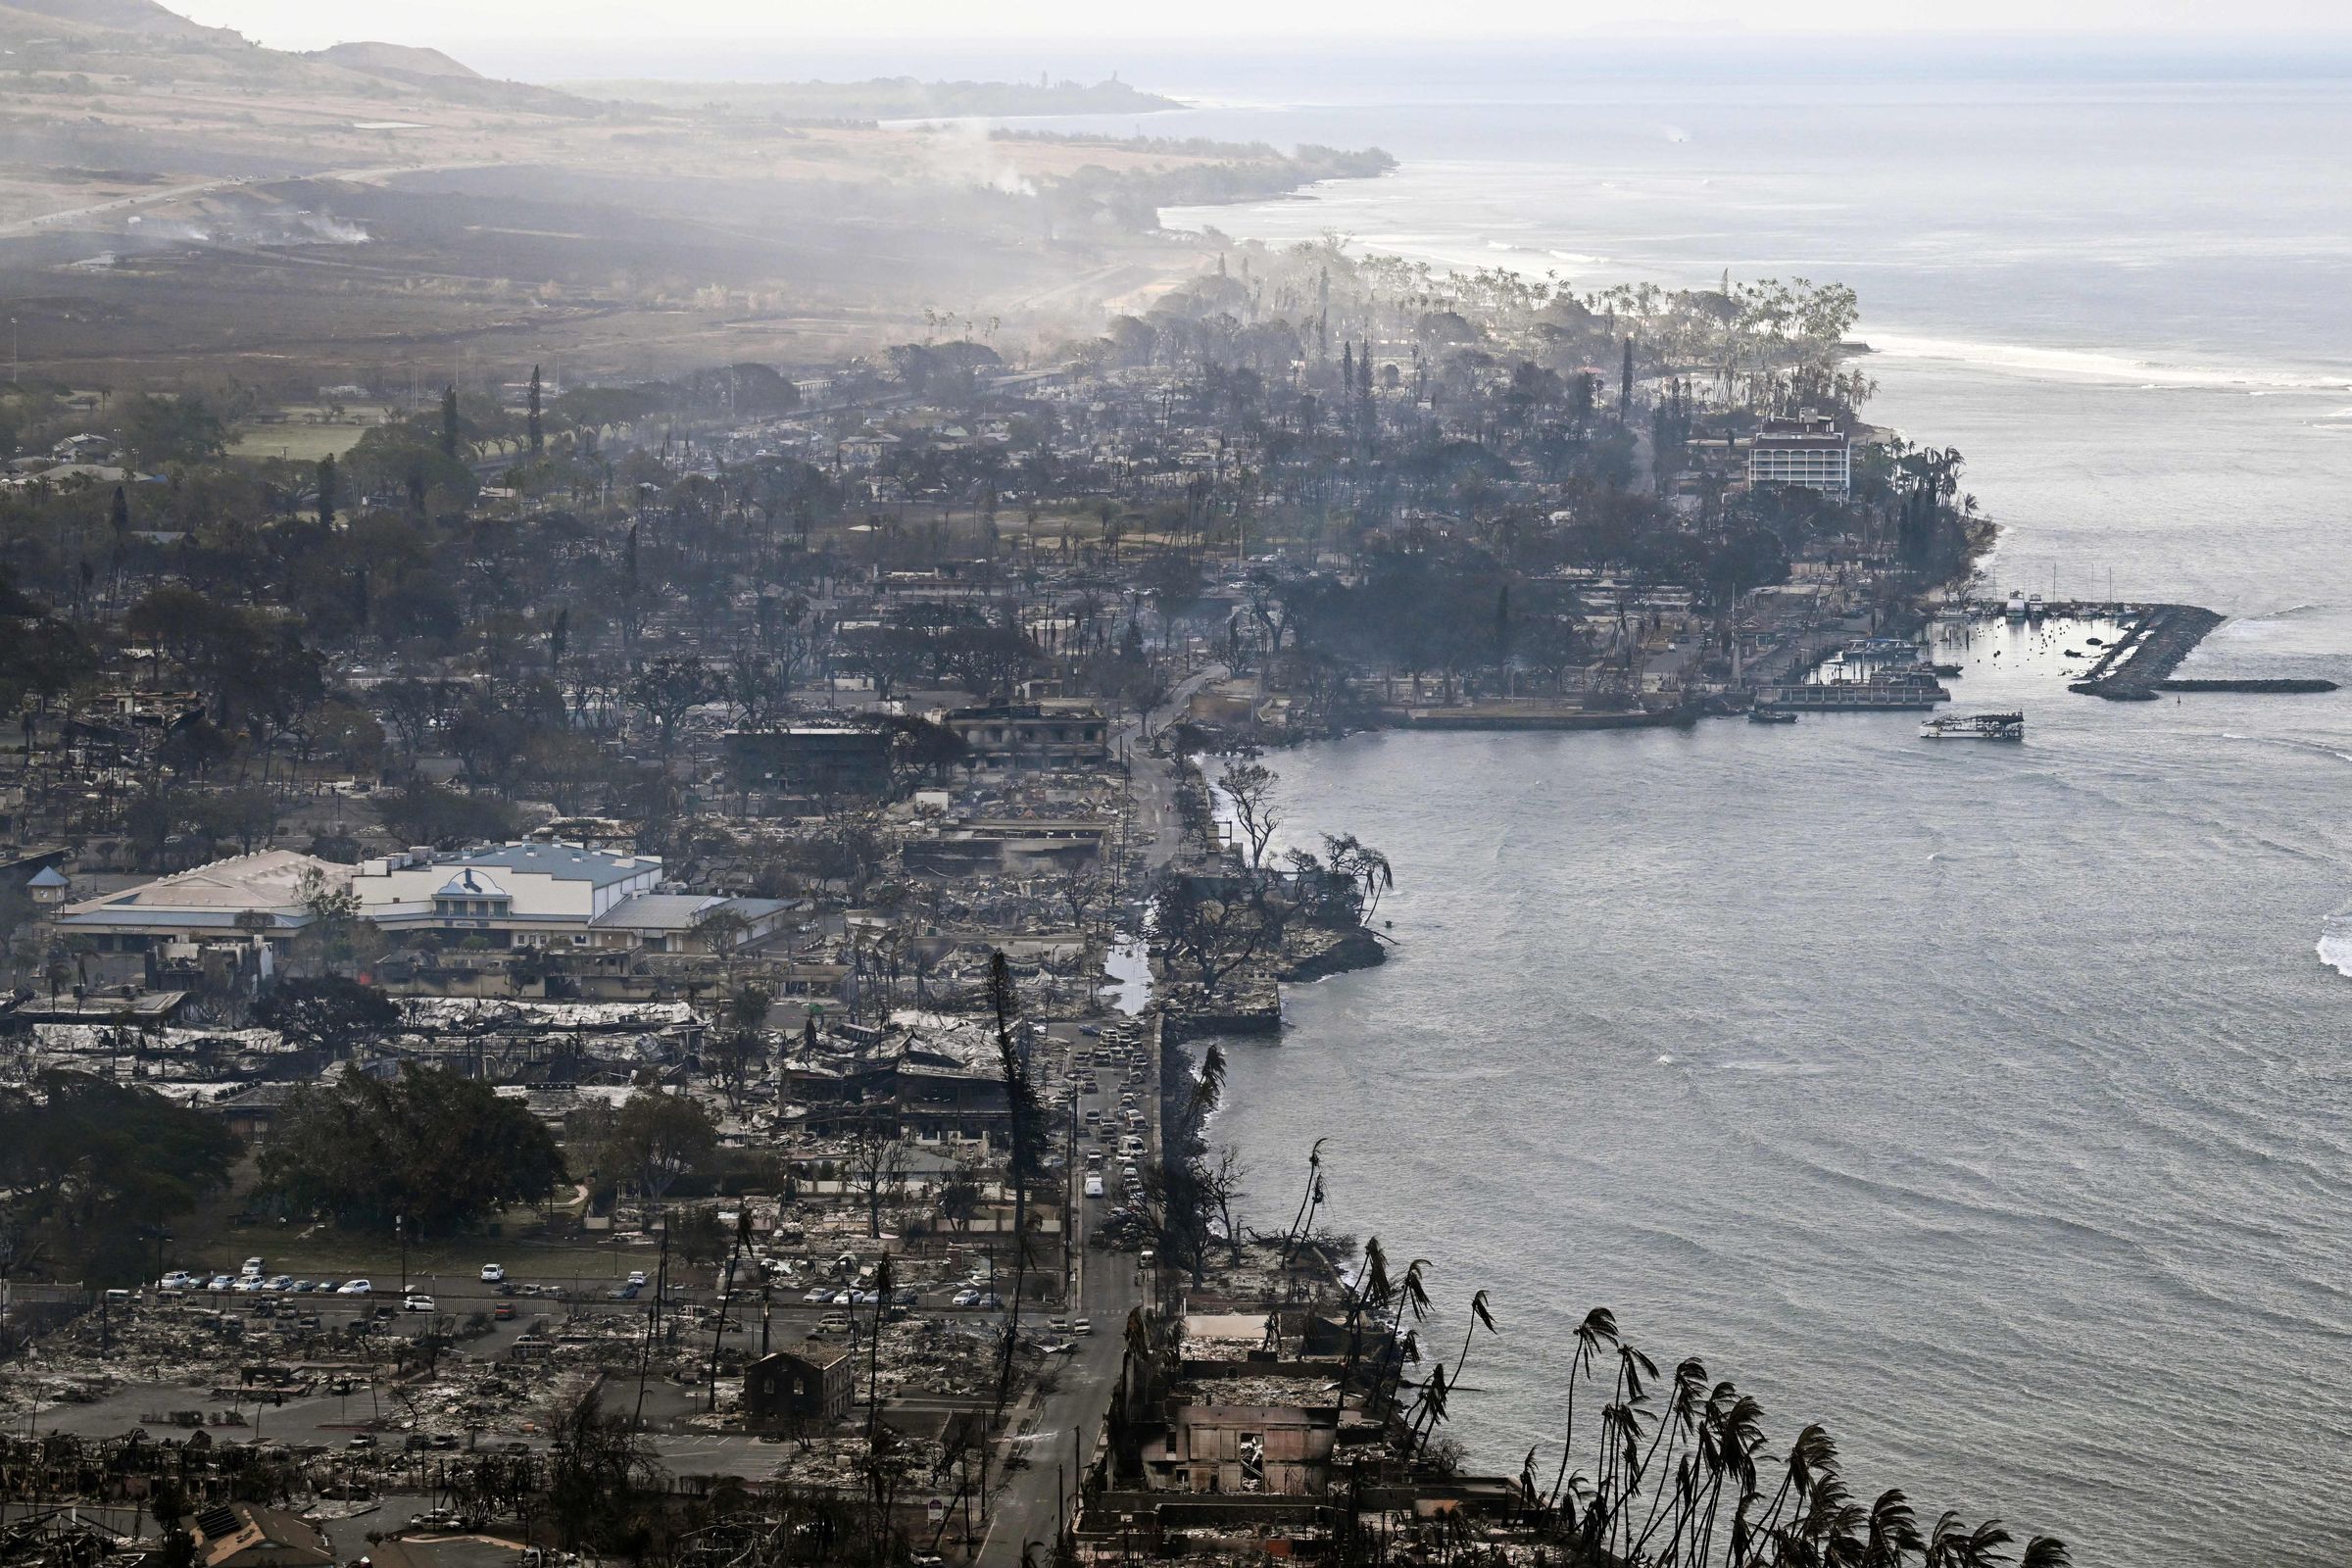 Burned homes, buildings, and trees along a shoreline, photographed from above